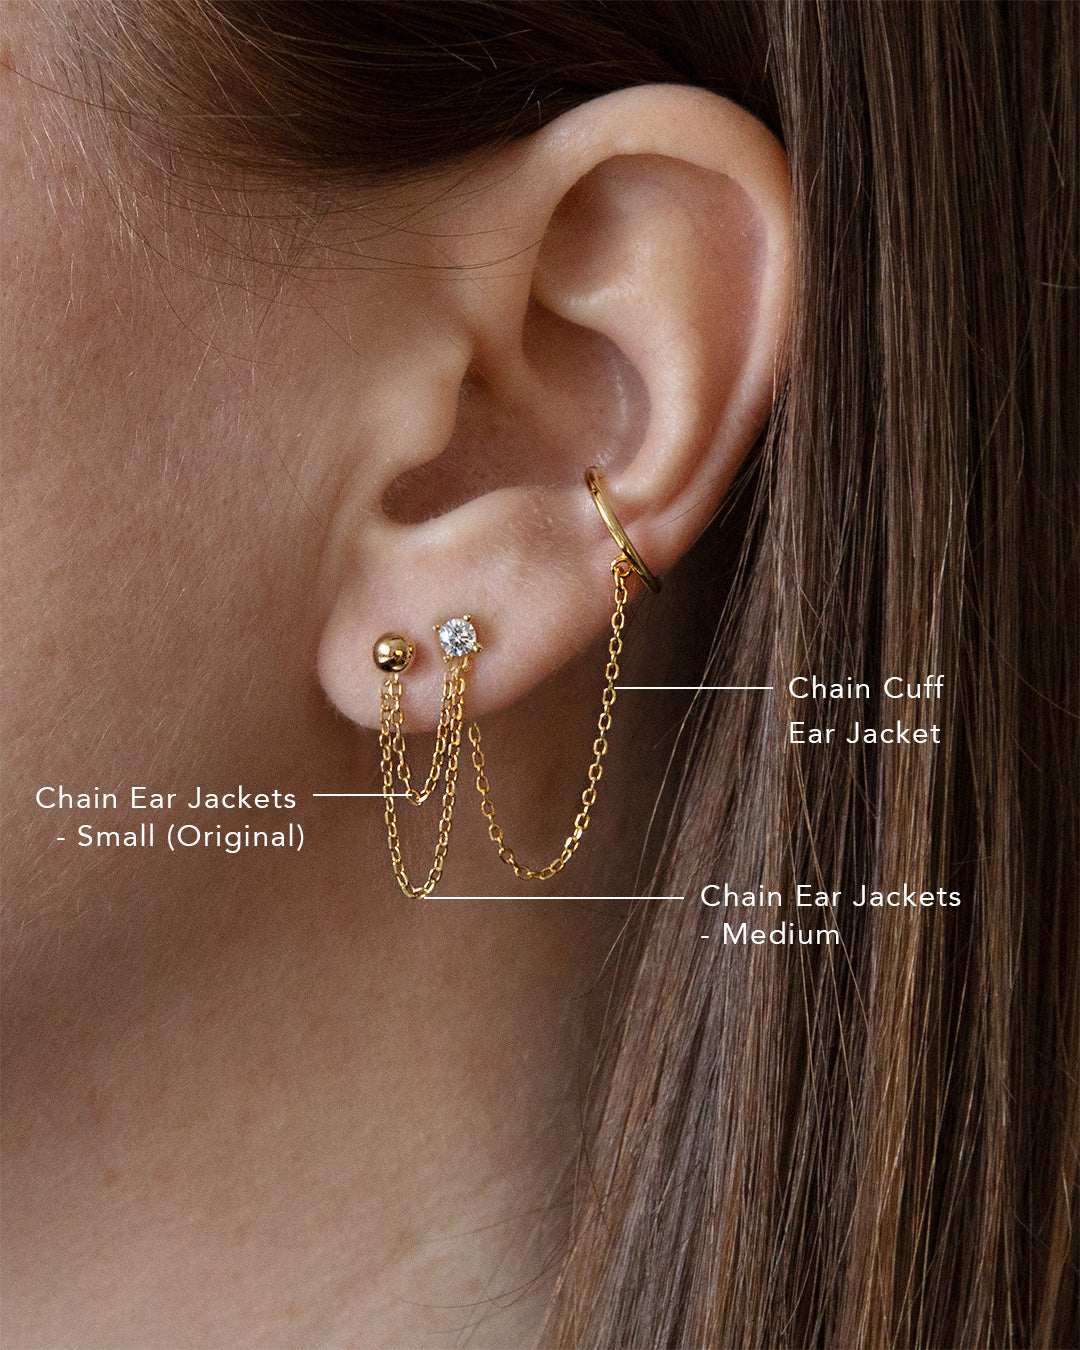 Chain Cuff Ear Jacket - Jewels & Aces